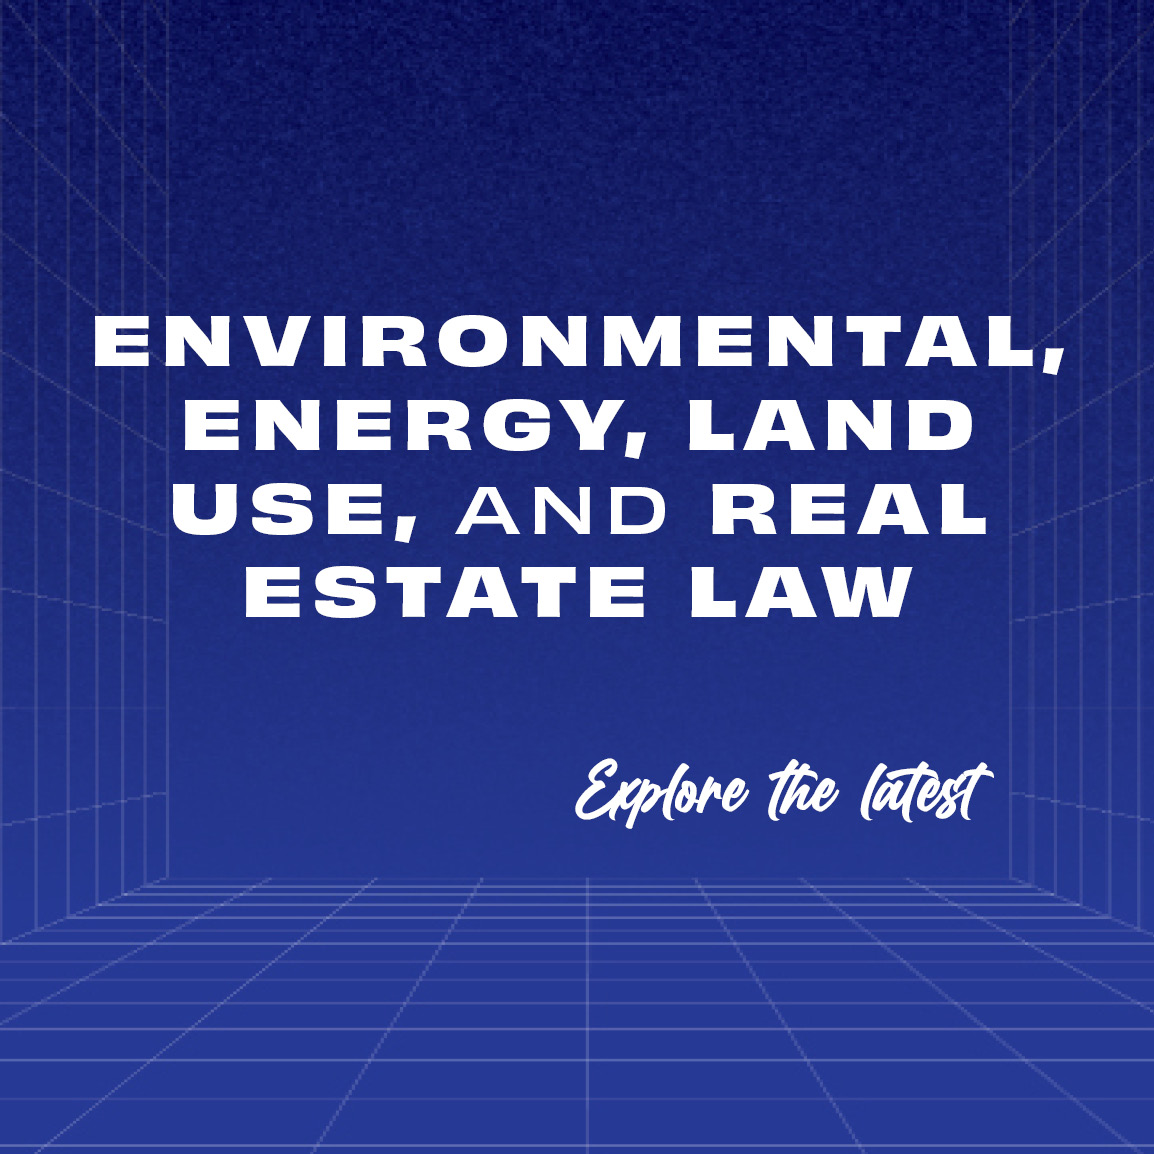 Environmental, Energy, Land Use, and Real Estate Law - Explore the latest